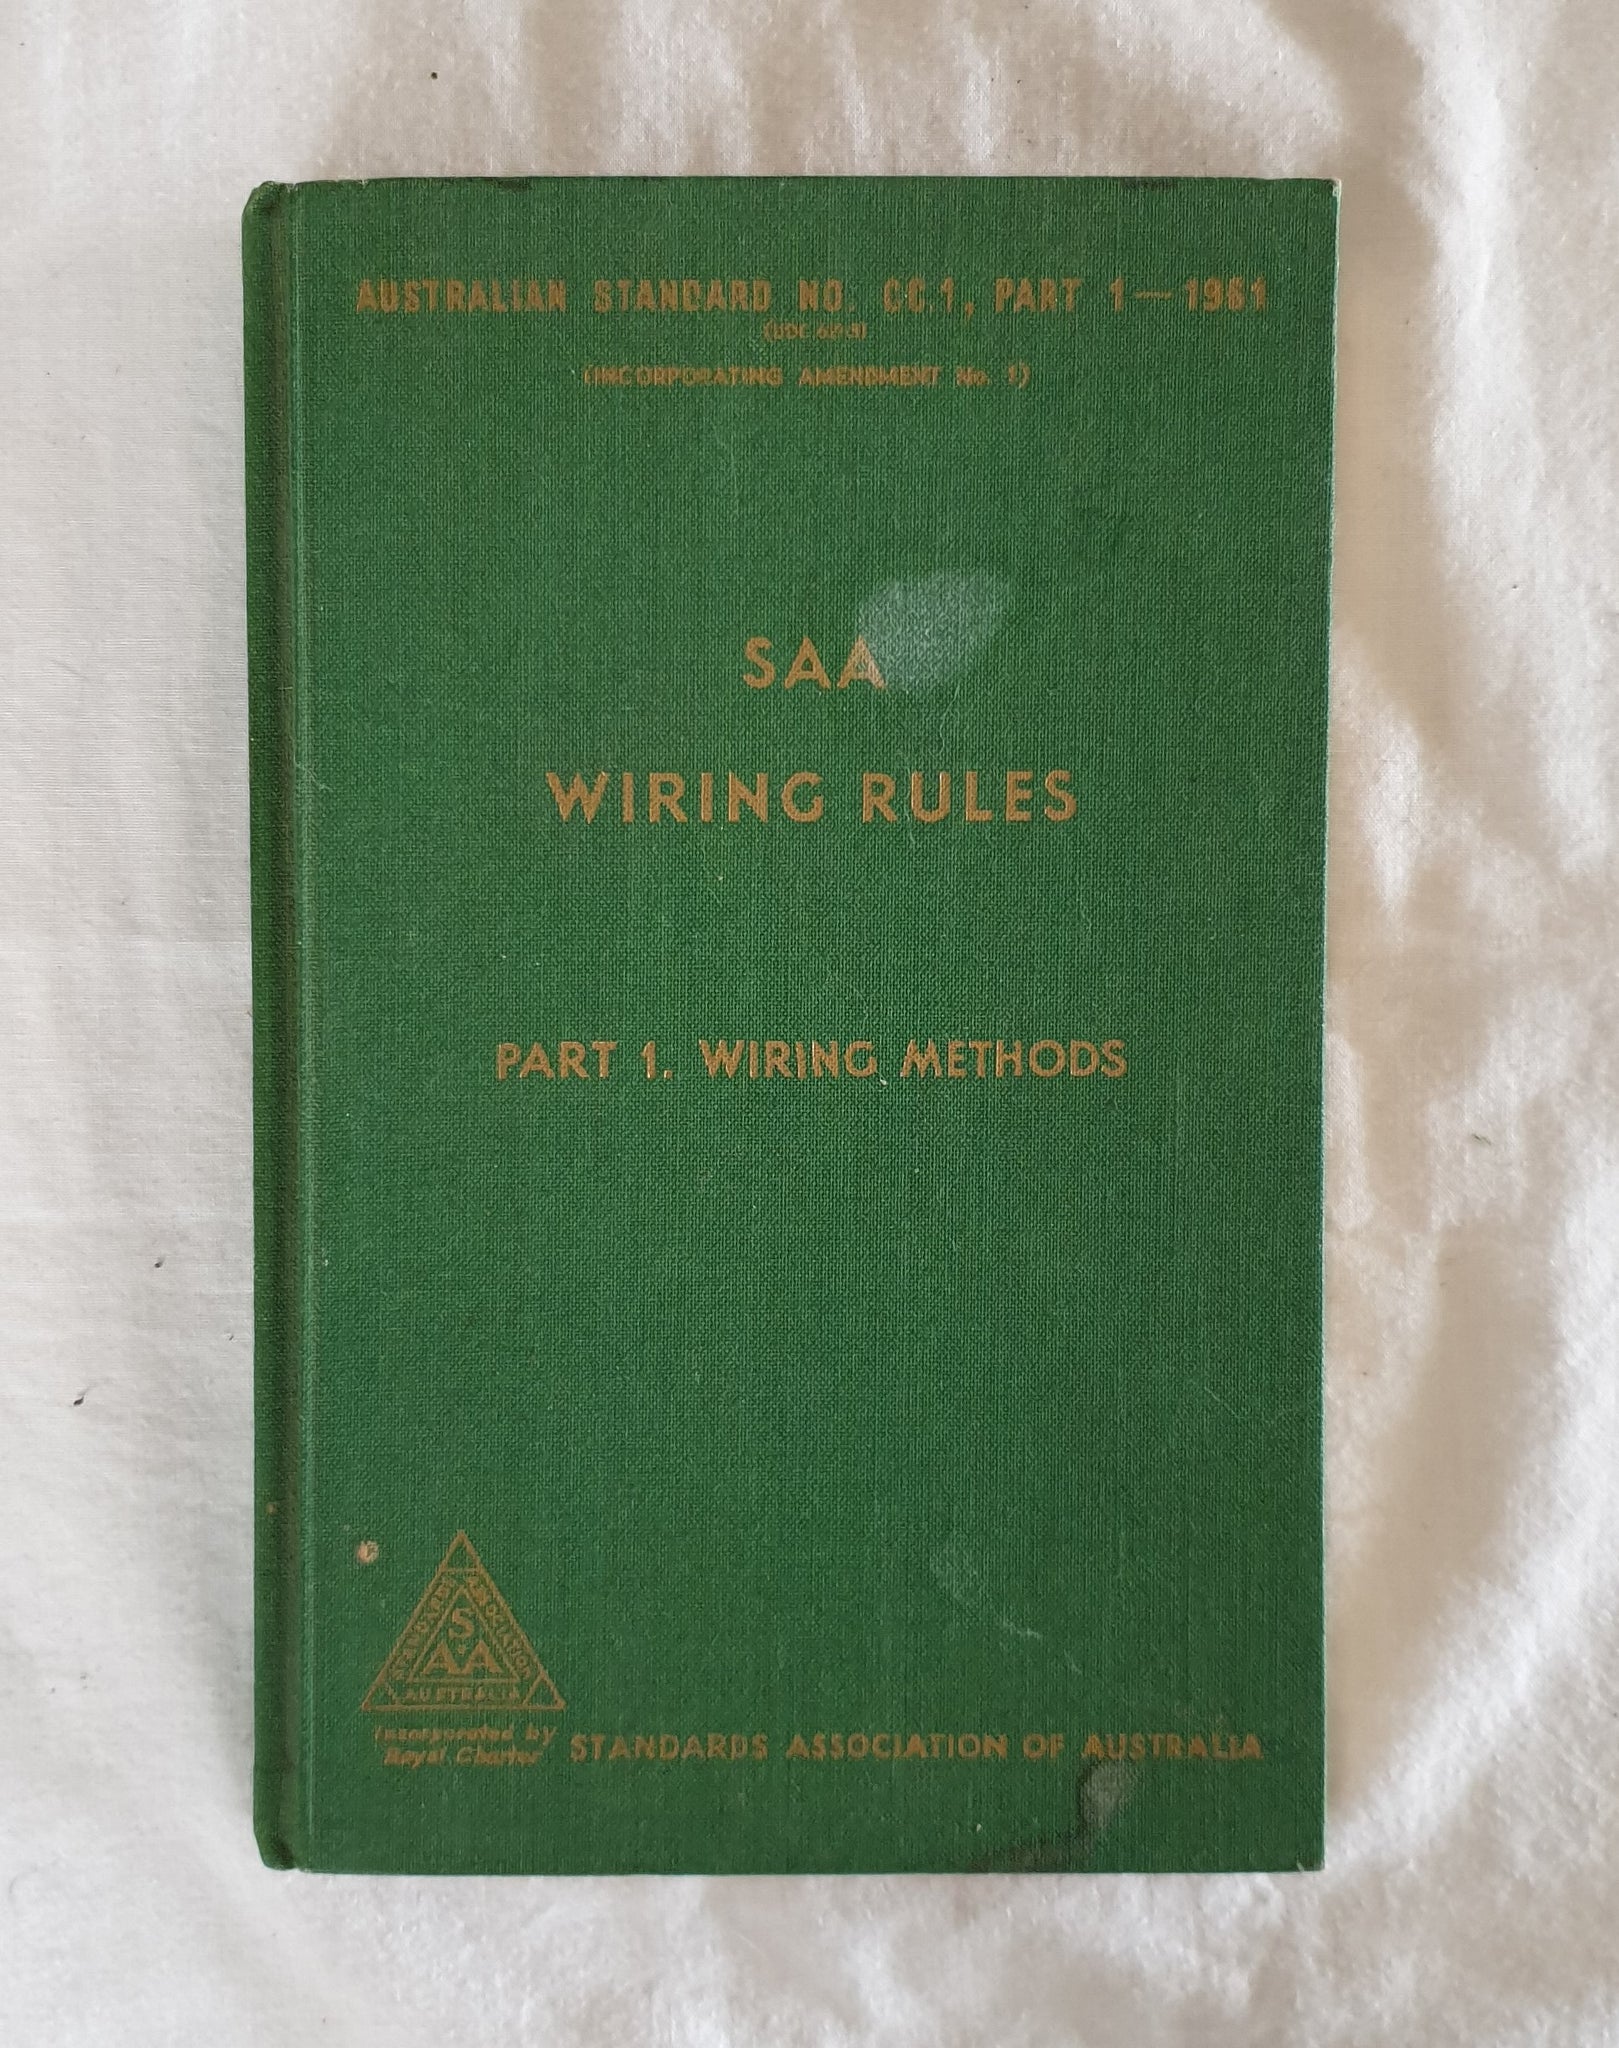 Wiring Rules by The Standards Association of Australia – Morgan's Rare